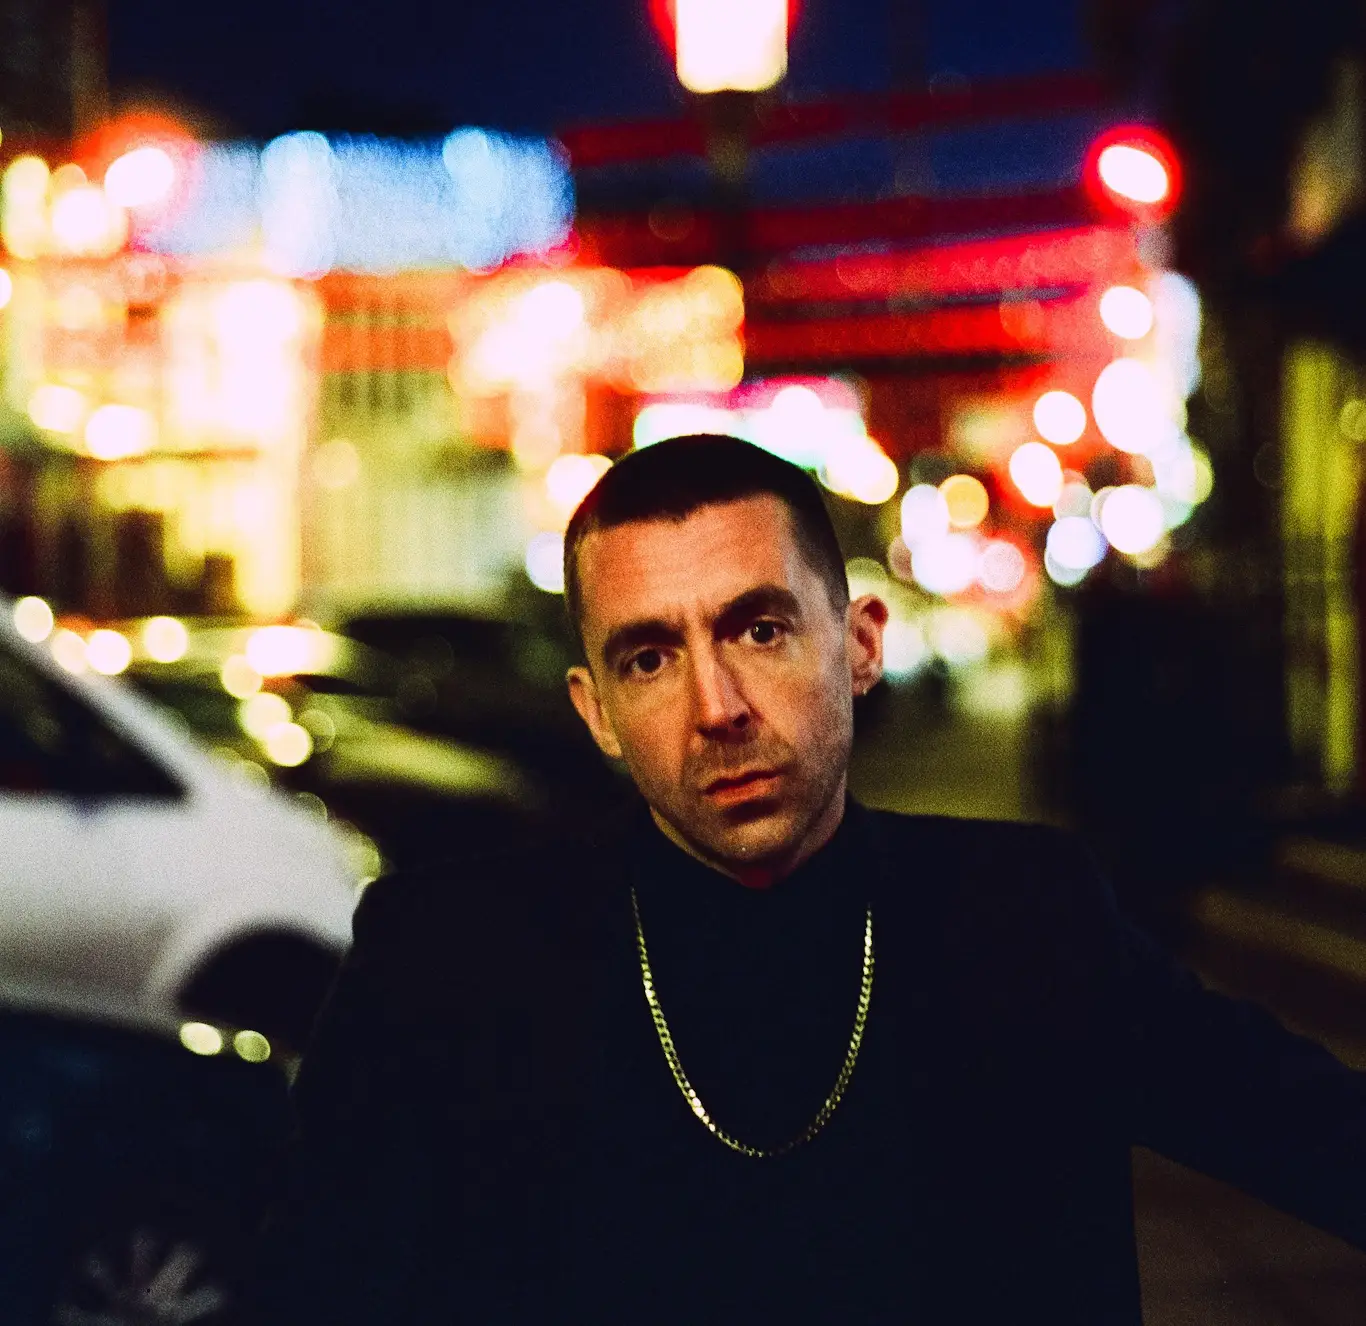 MILES KANE returns with new album ‘One Man Band’ & reveals video for ‘Troubled Son’